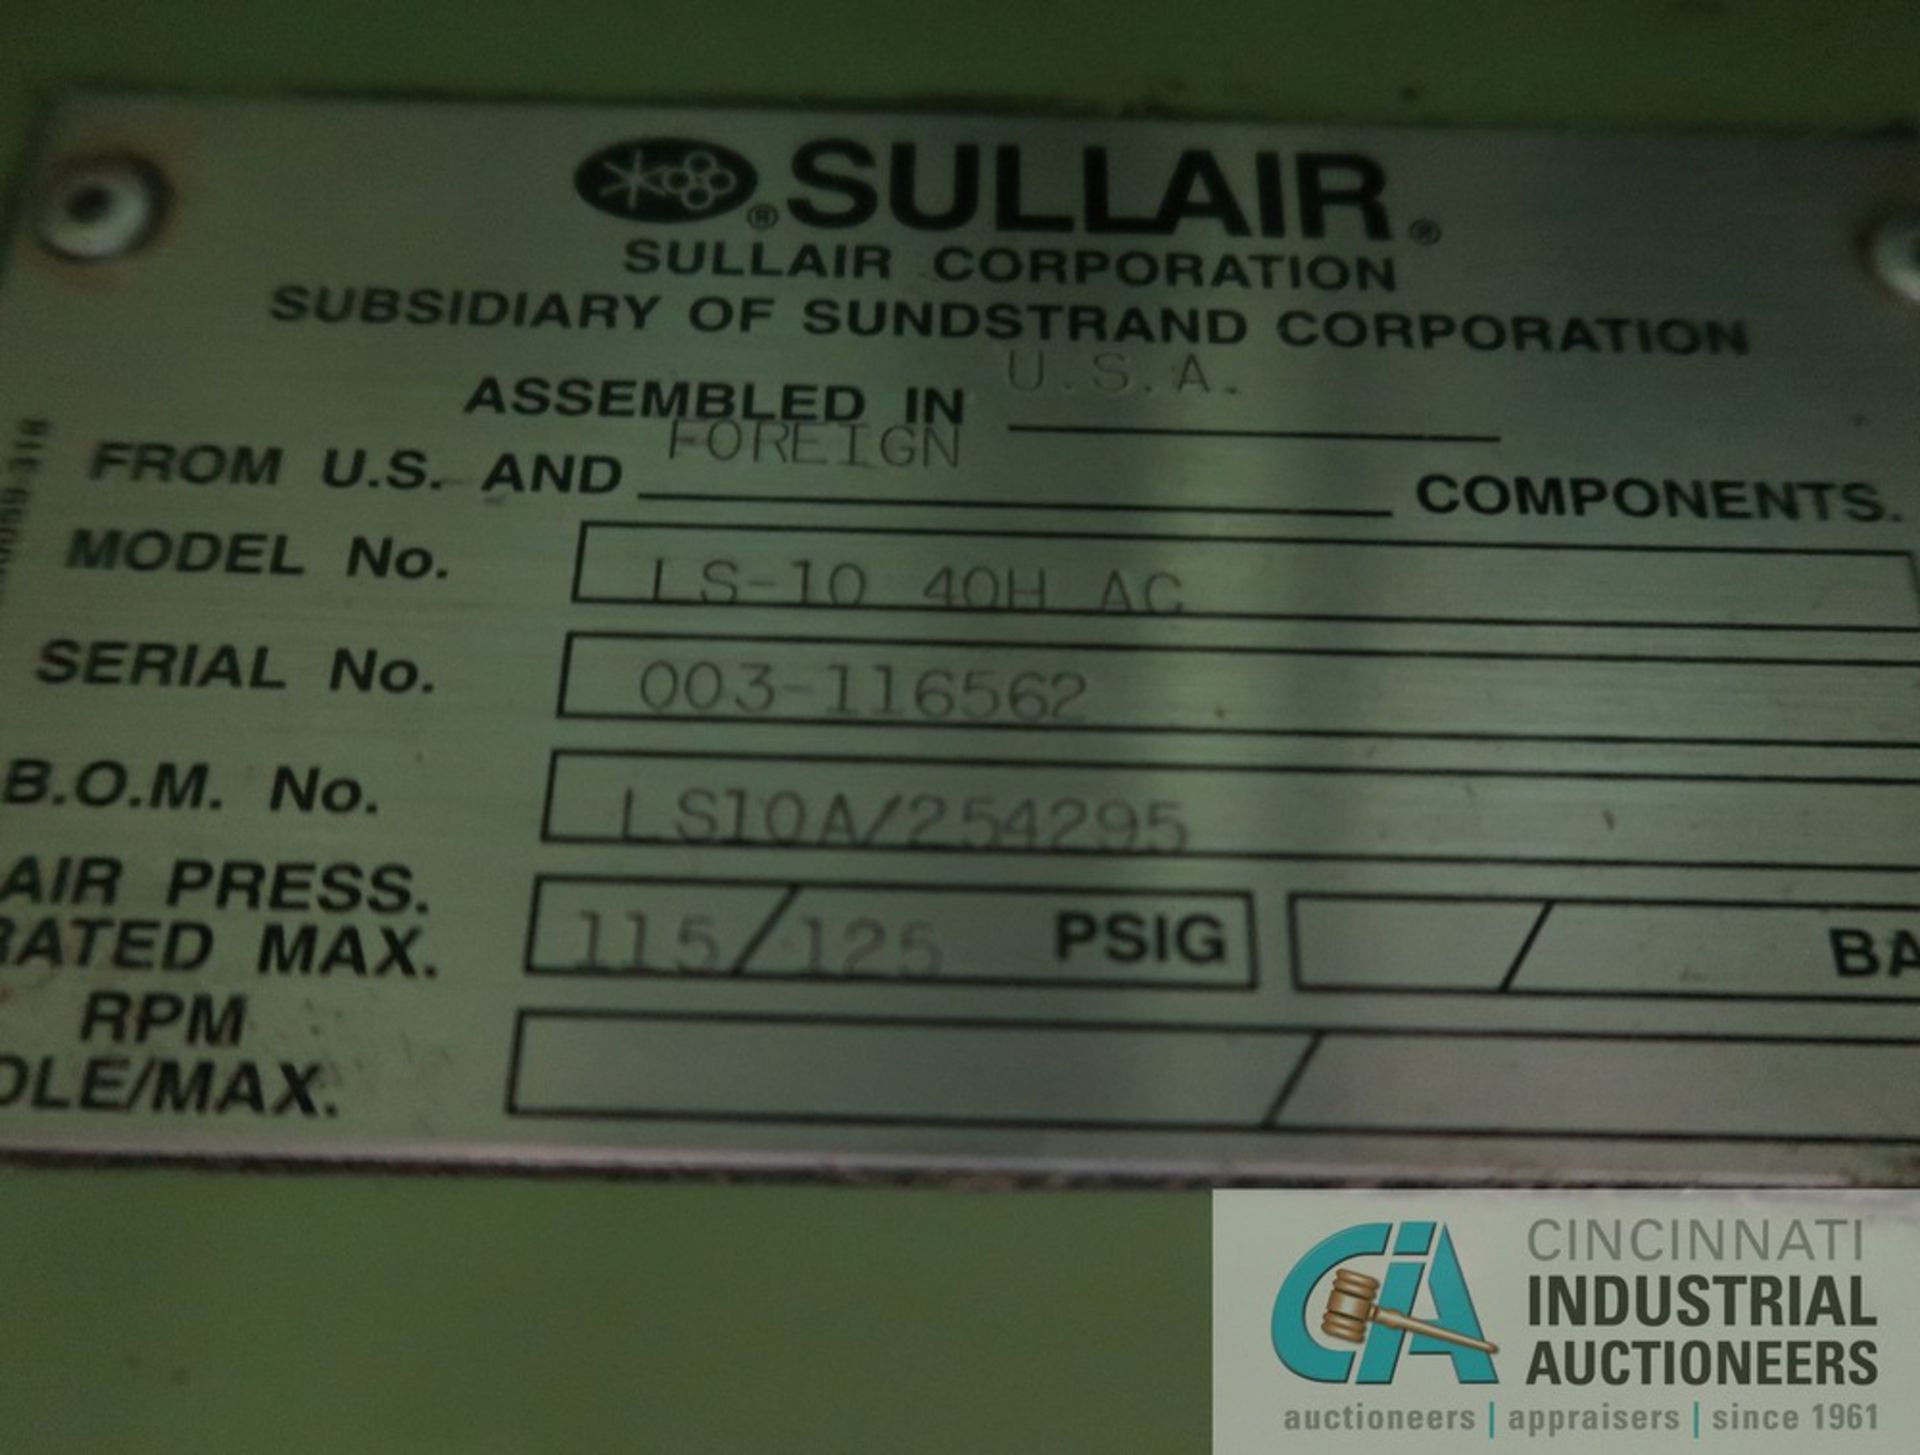 40 HP SULLAIR MODEL LS-1040H AC ROTARY SCREW AIR COMPRESSOR; S/N 003-116562, 230/460 VOLTS, 3-PHASE, - Image 18 of 19